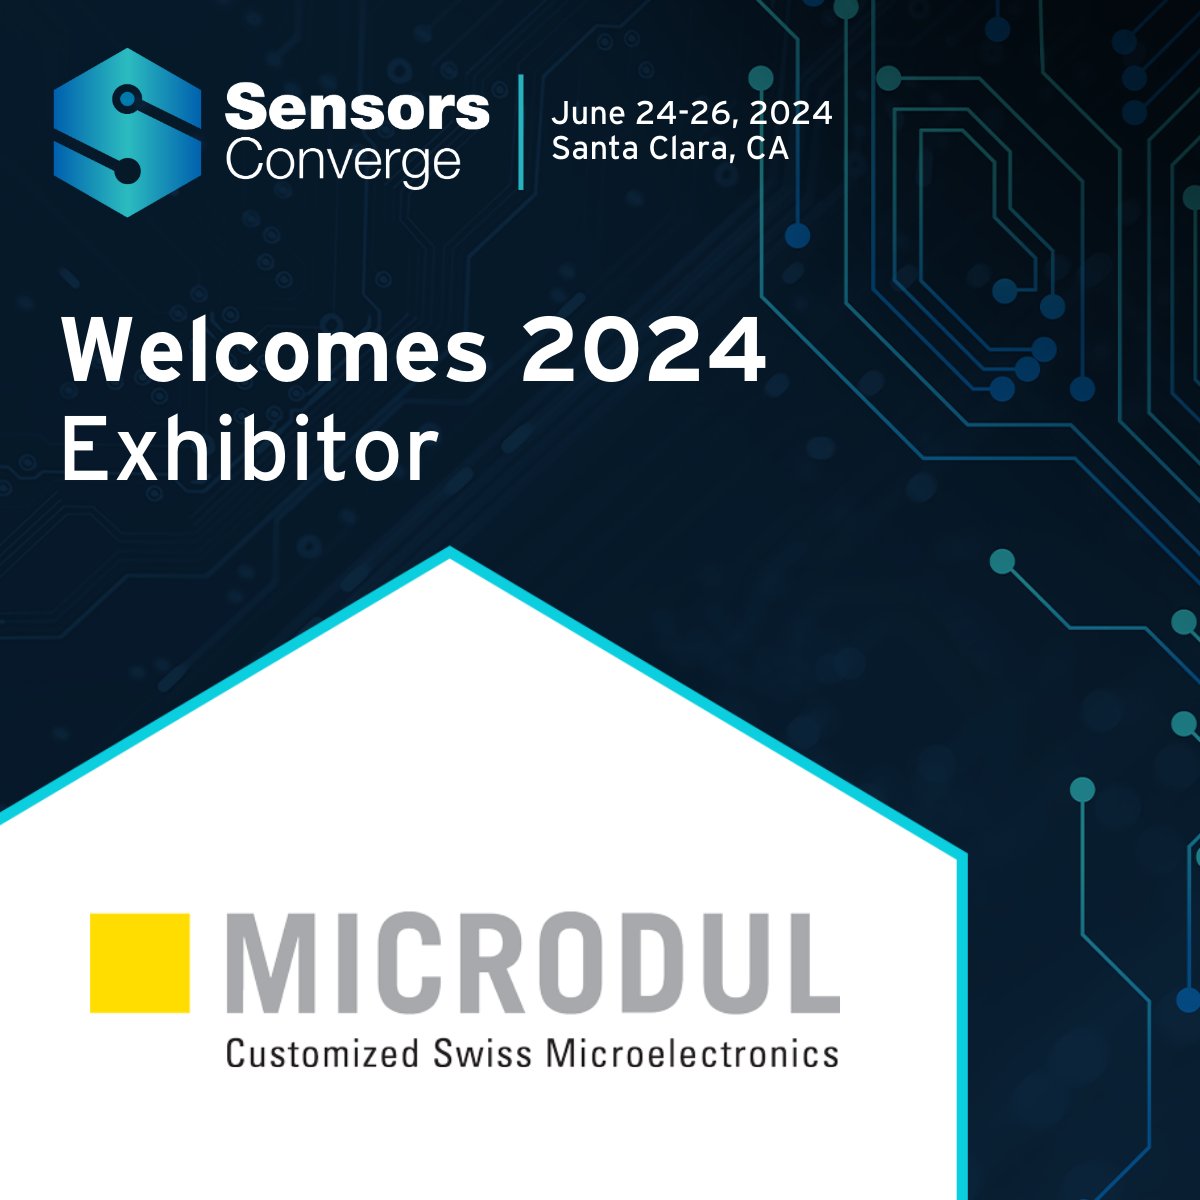 Welcome Microdul AG to #SensorsConverge!

Microdul AG is a trusted partner for advanced microelectronics. Learn more: microdul.com/en/

Register now and join us this June 24-26 in Santa Clara! sensorsconverge.com/sensorsconverg…

#sensors #microelectronics